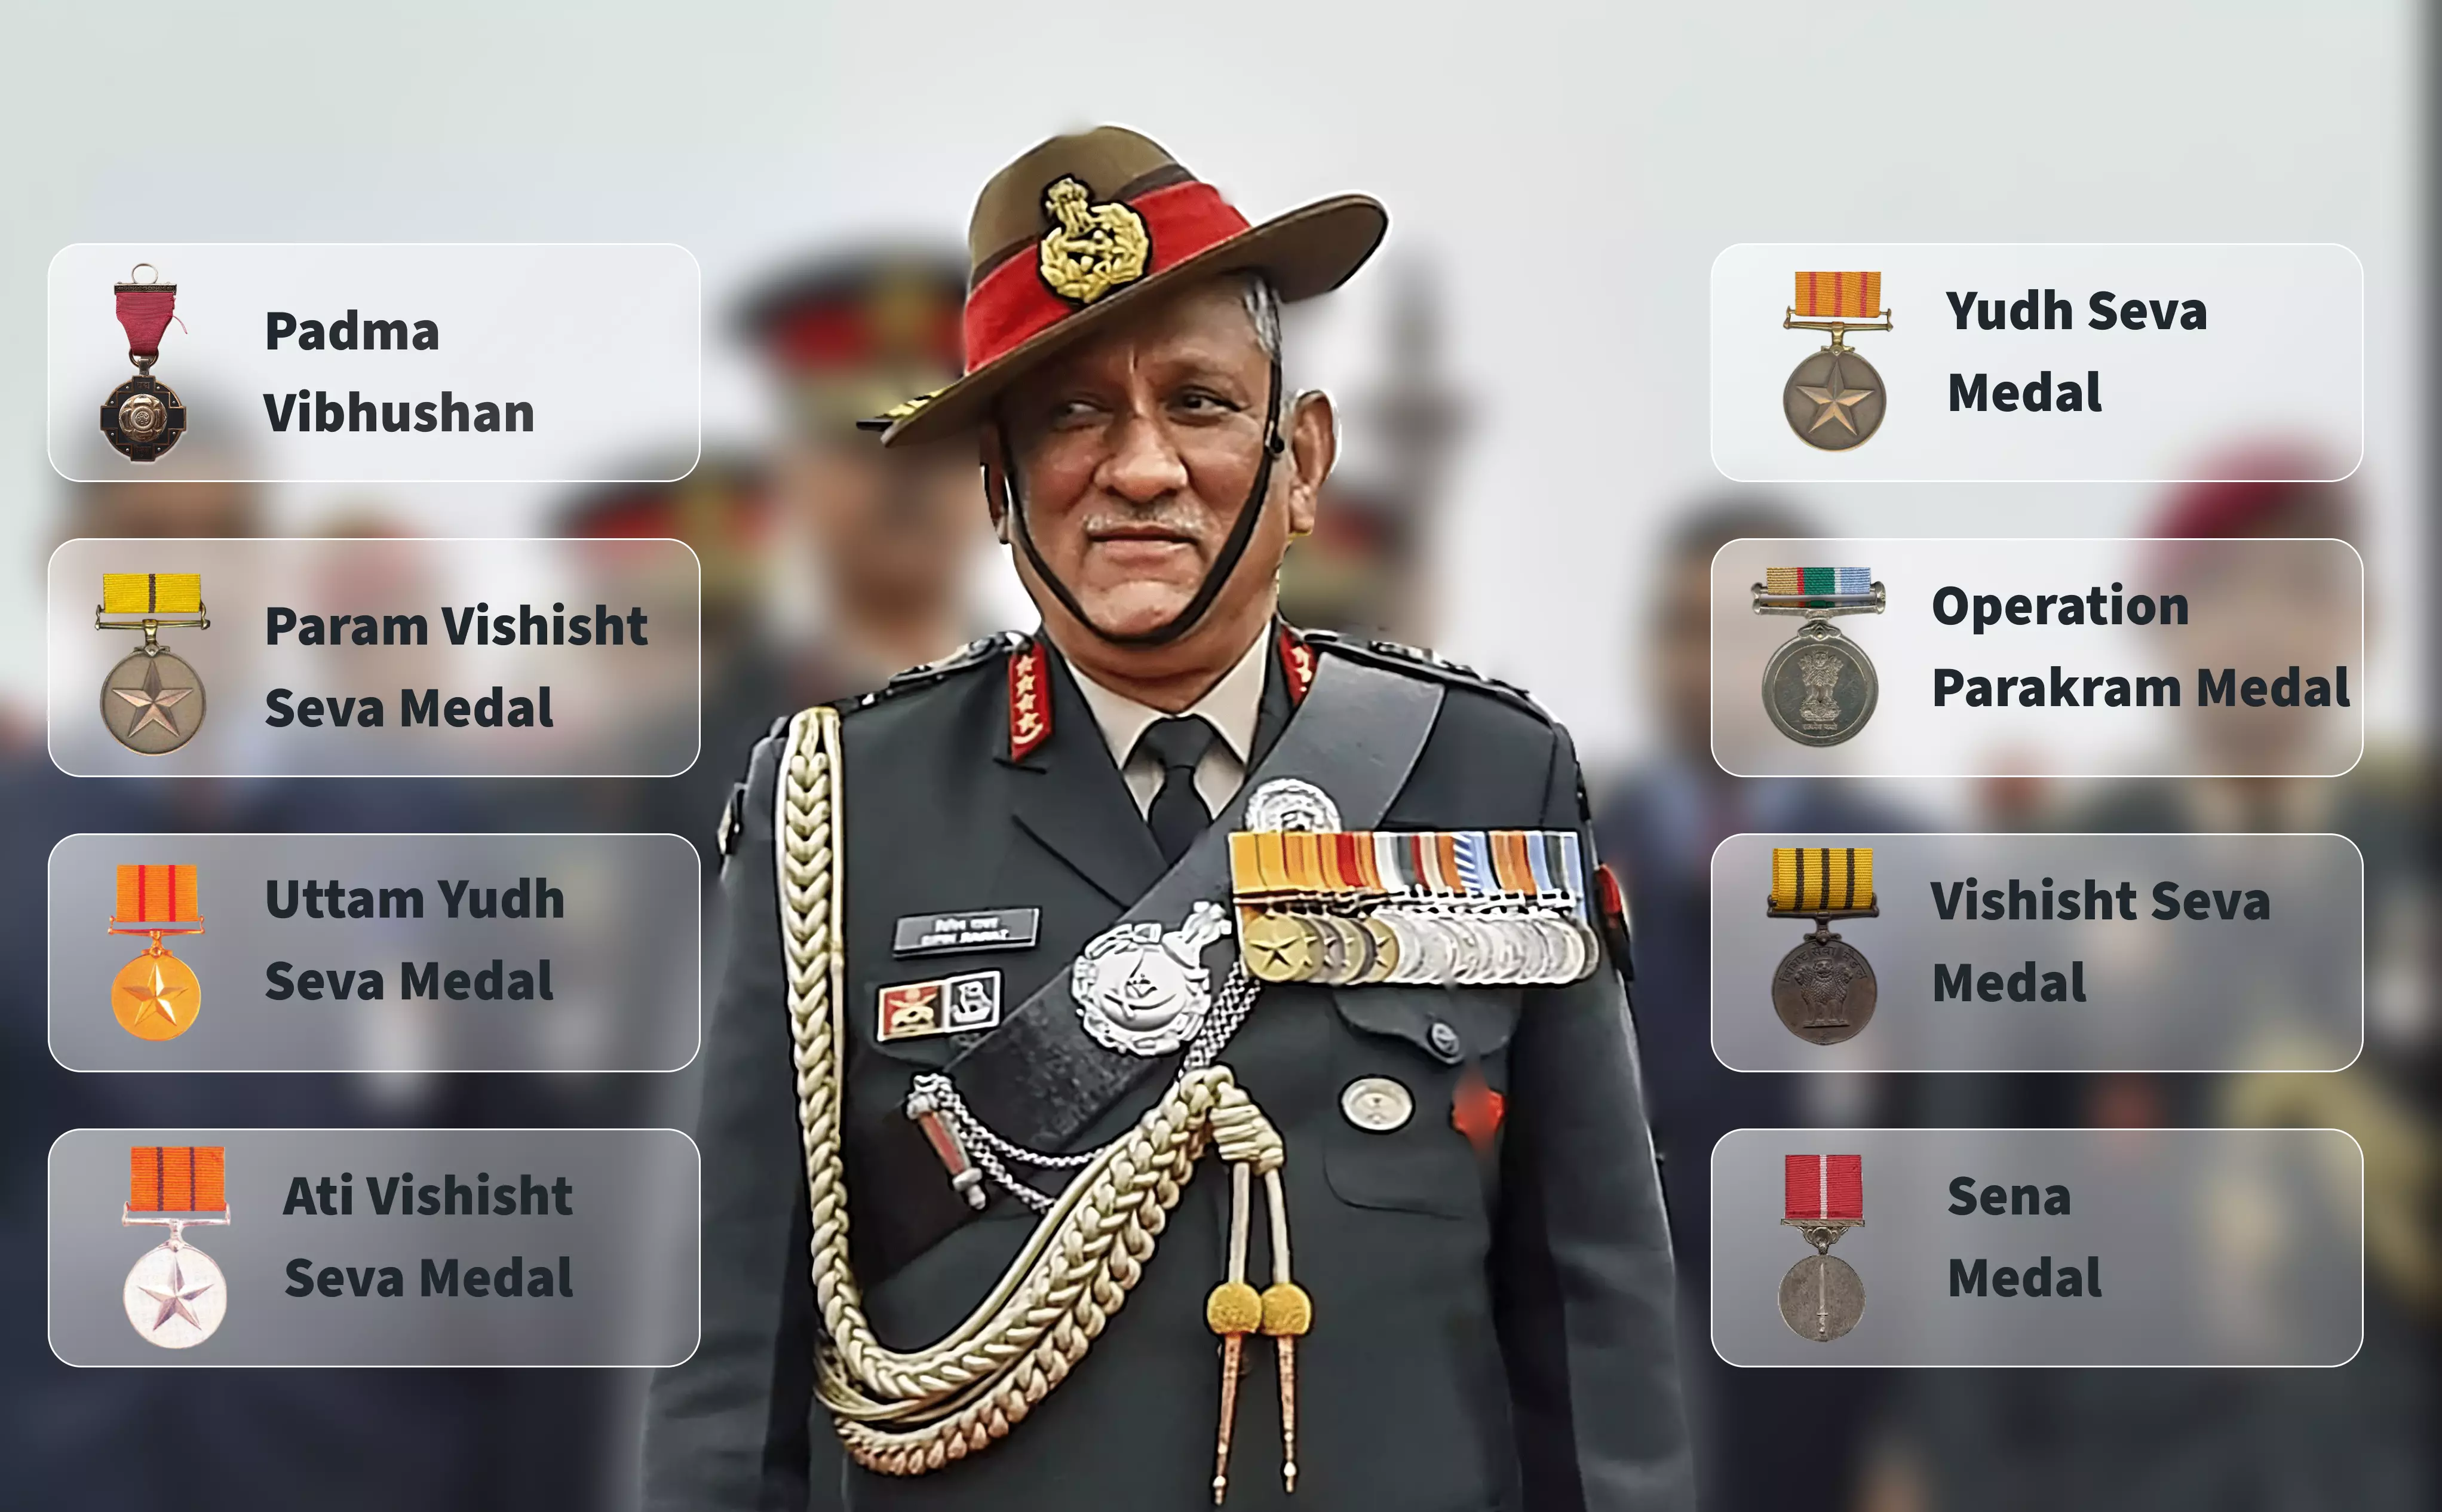 In image: Late CDS Shri Bipin Rawat ji and few of his medals / army badges